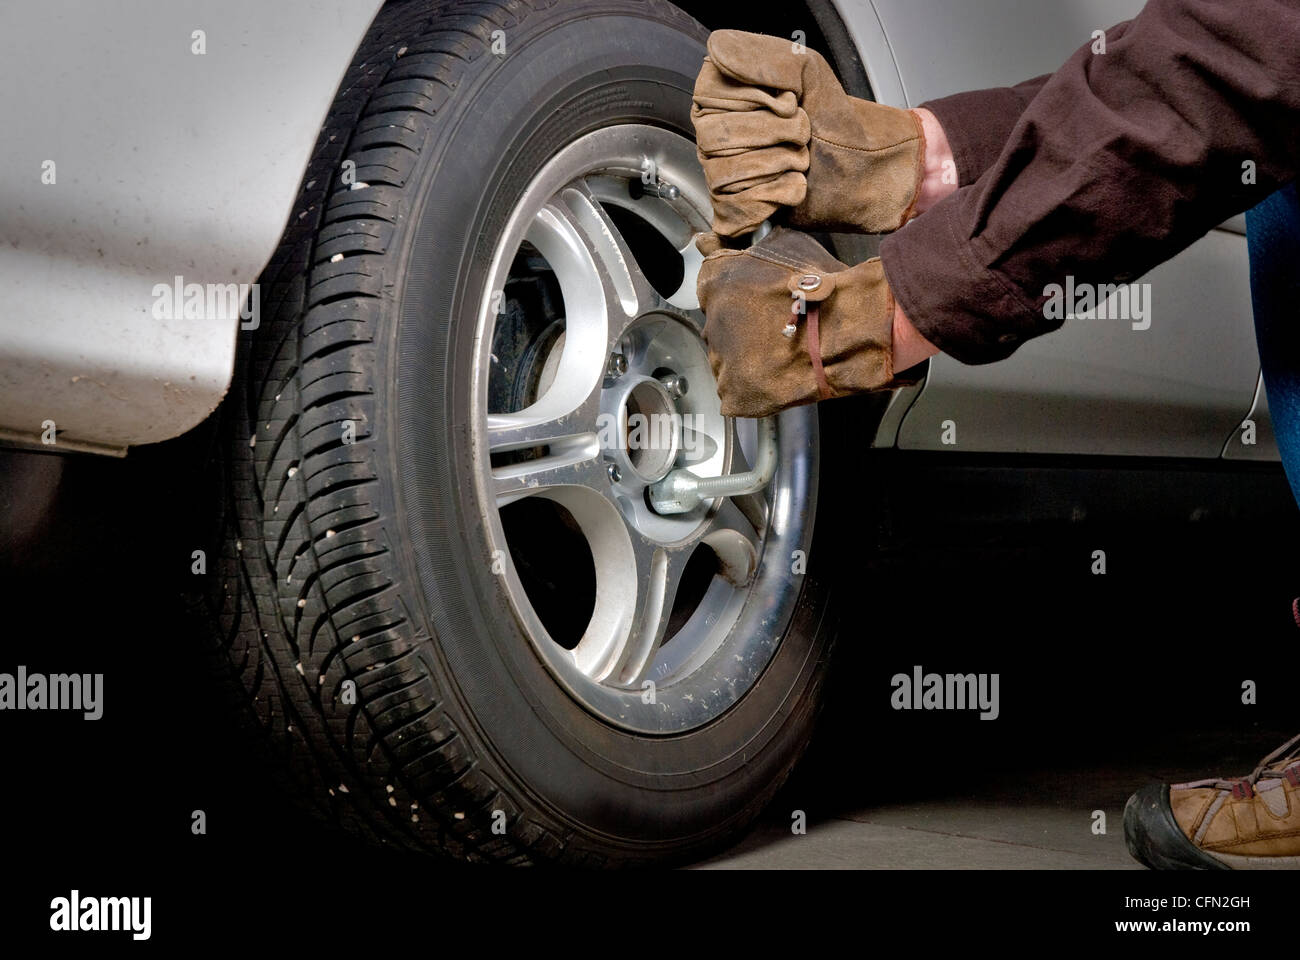 Lug Nuts are removed so that a tire can be replaced Stock Photo